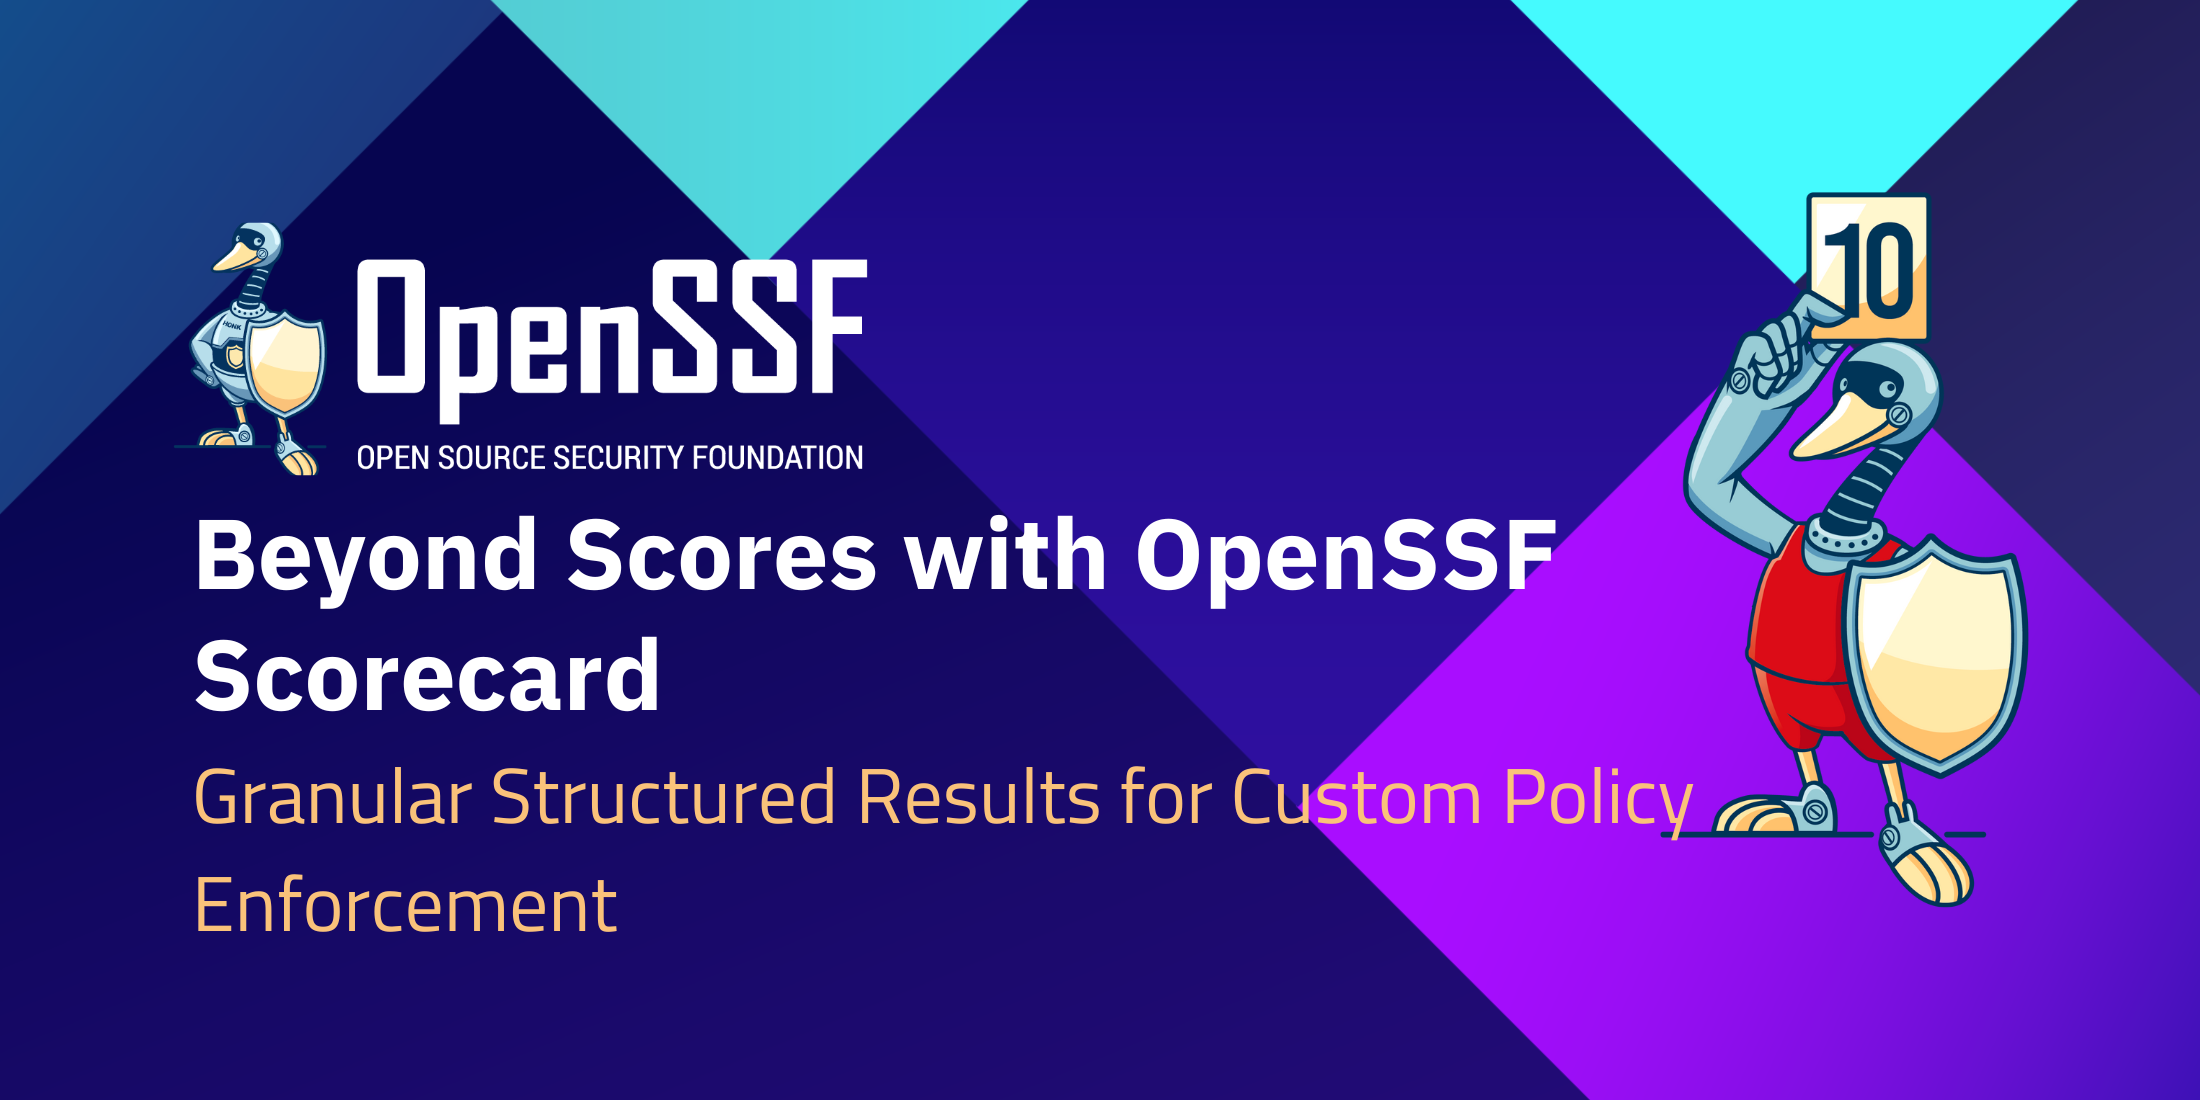 Beyond Scores with OpenSSF Scorecard